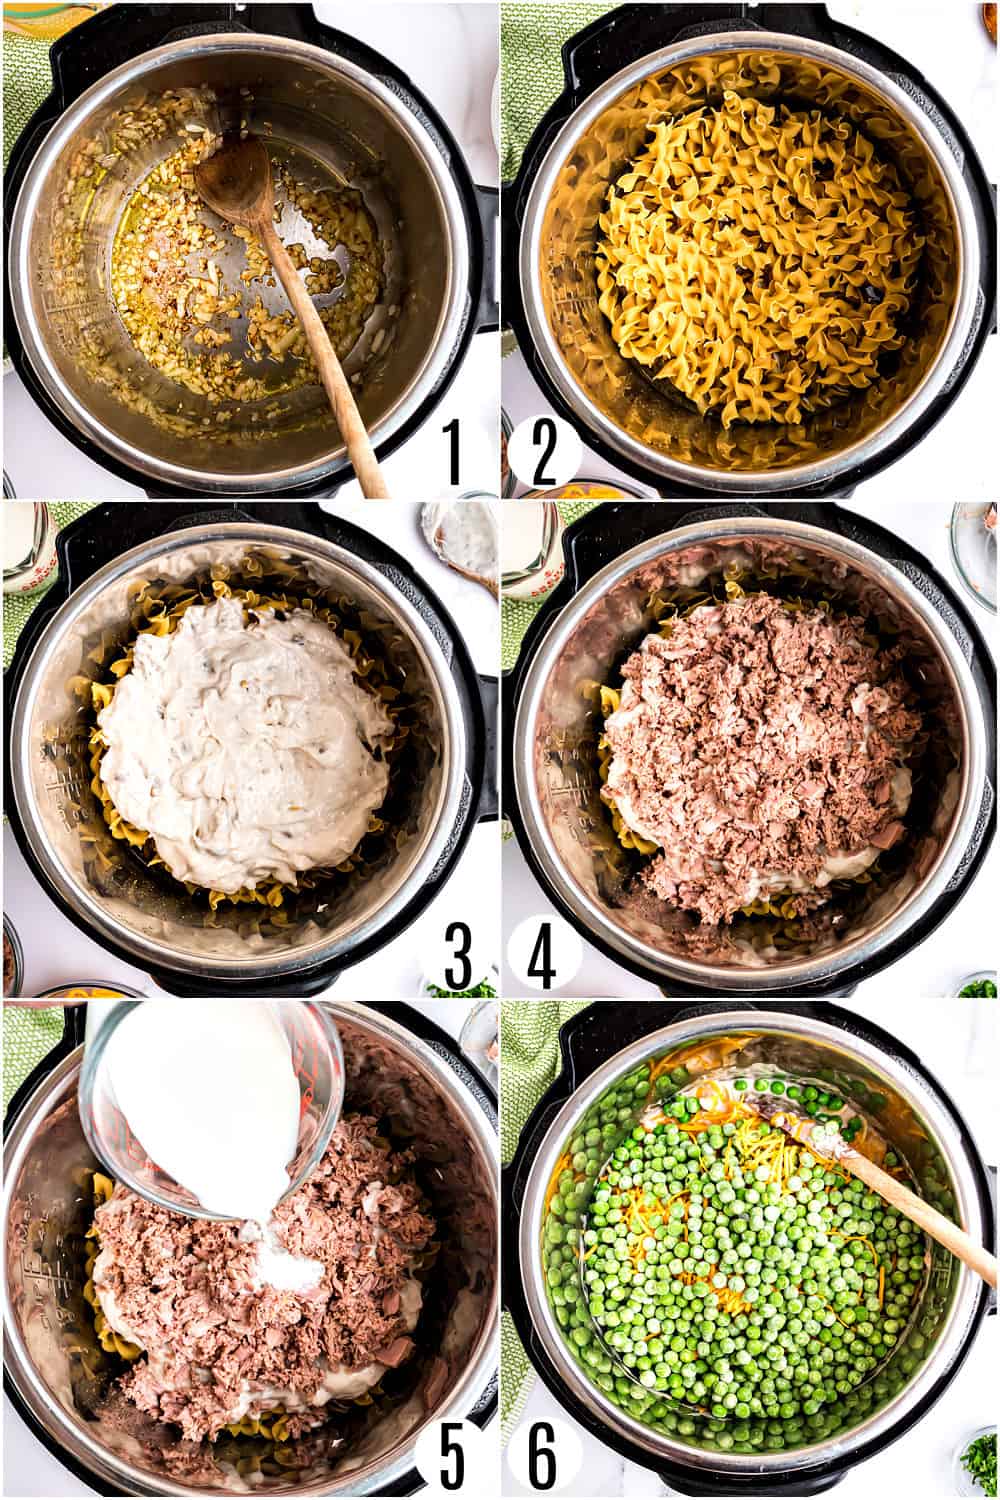 Step by step photos showing how to make tuna noodle casserole in the pressure cooker.